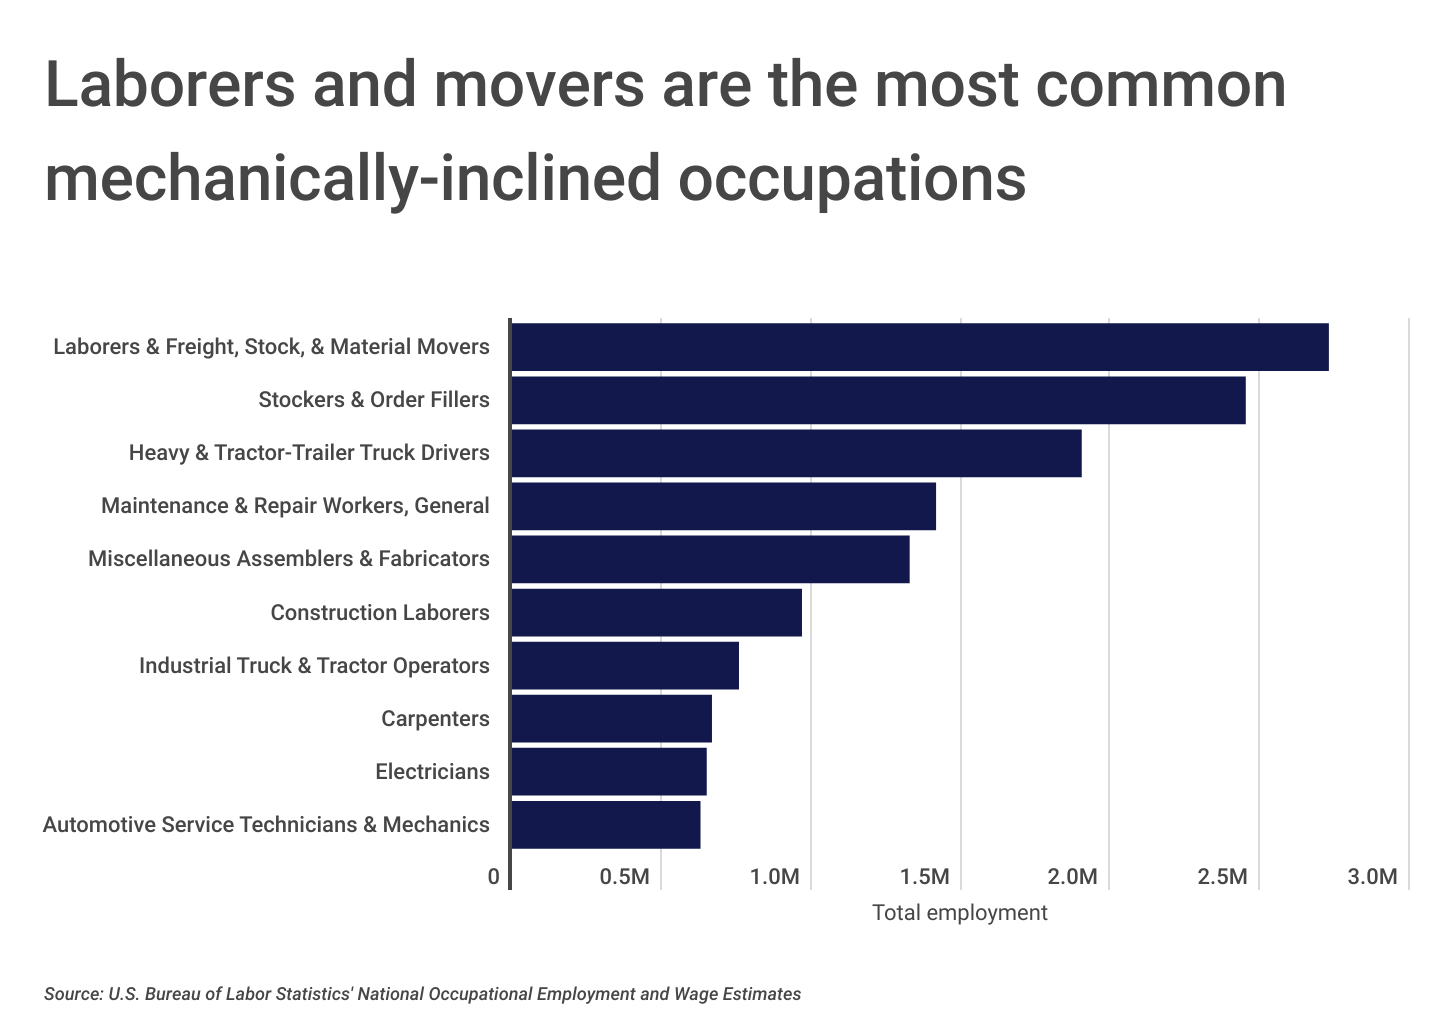 Chart1_Laborers and movers are most common mechanically-inclined occupations